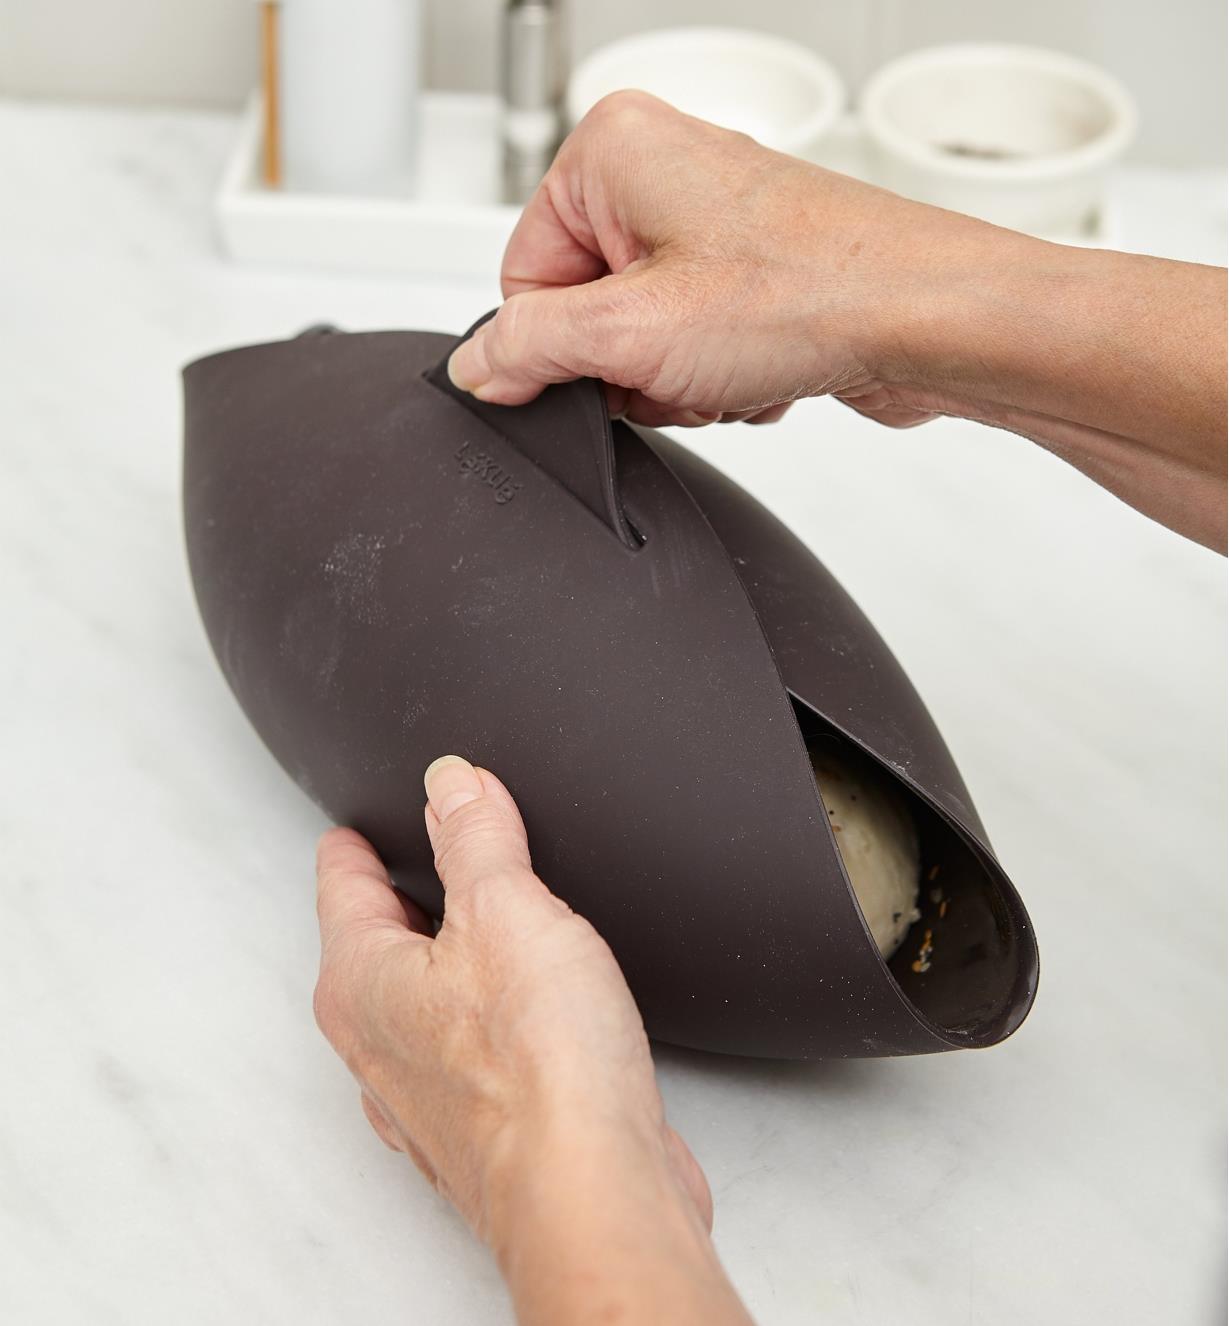 Silicone bowl closed around dough, ready for baking